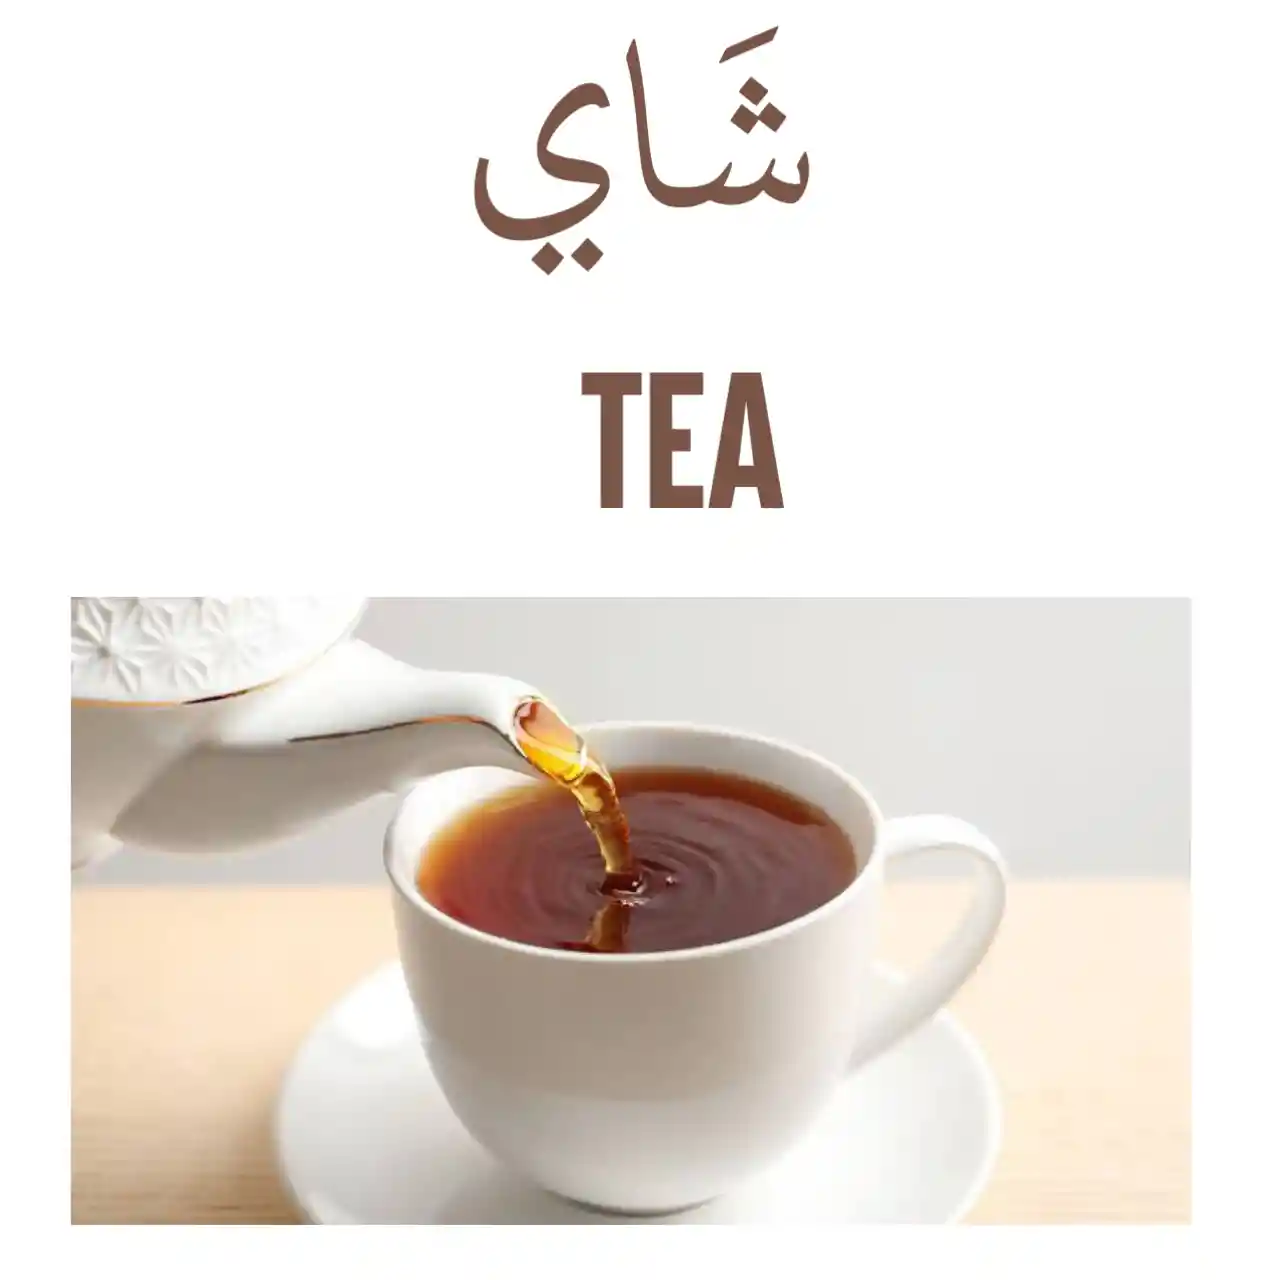 How To Say Tea in Arabic